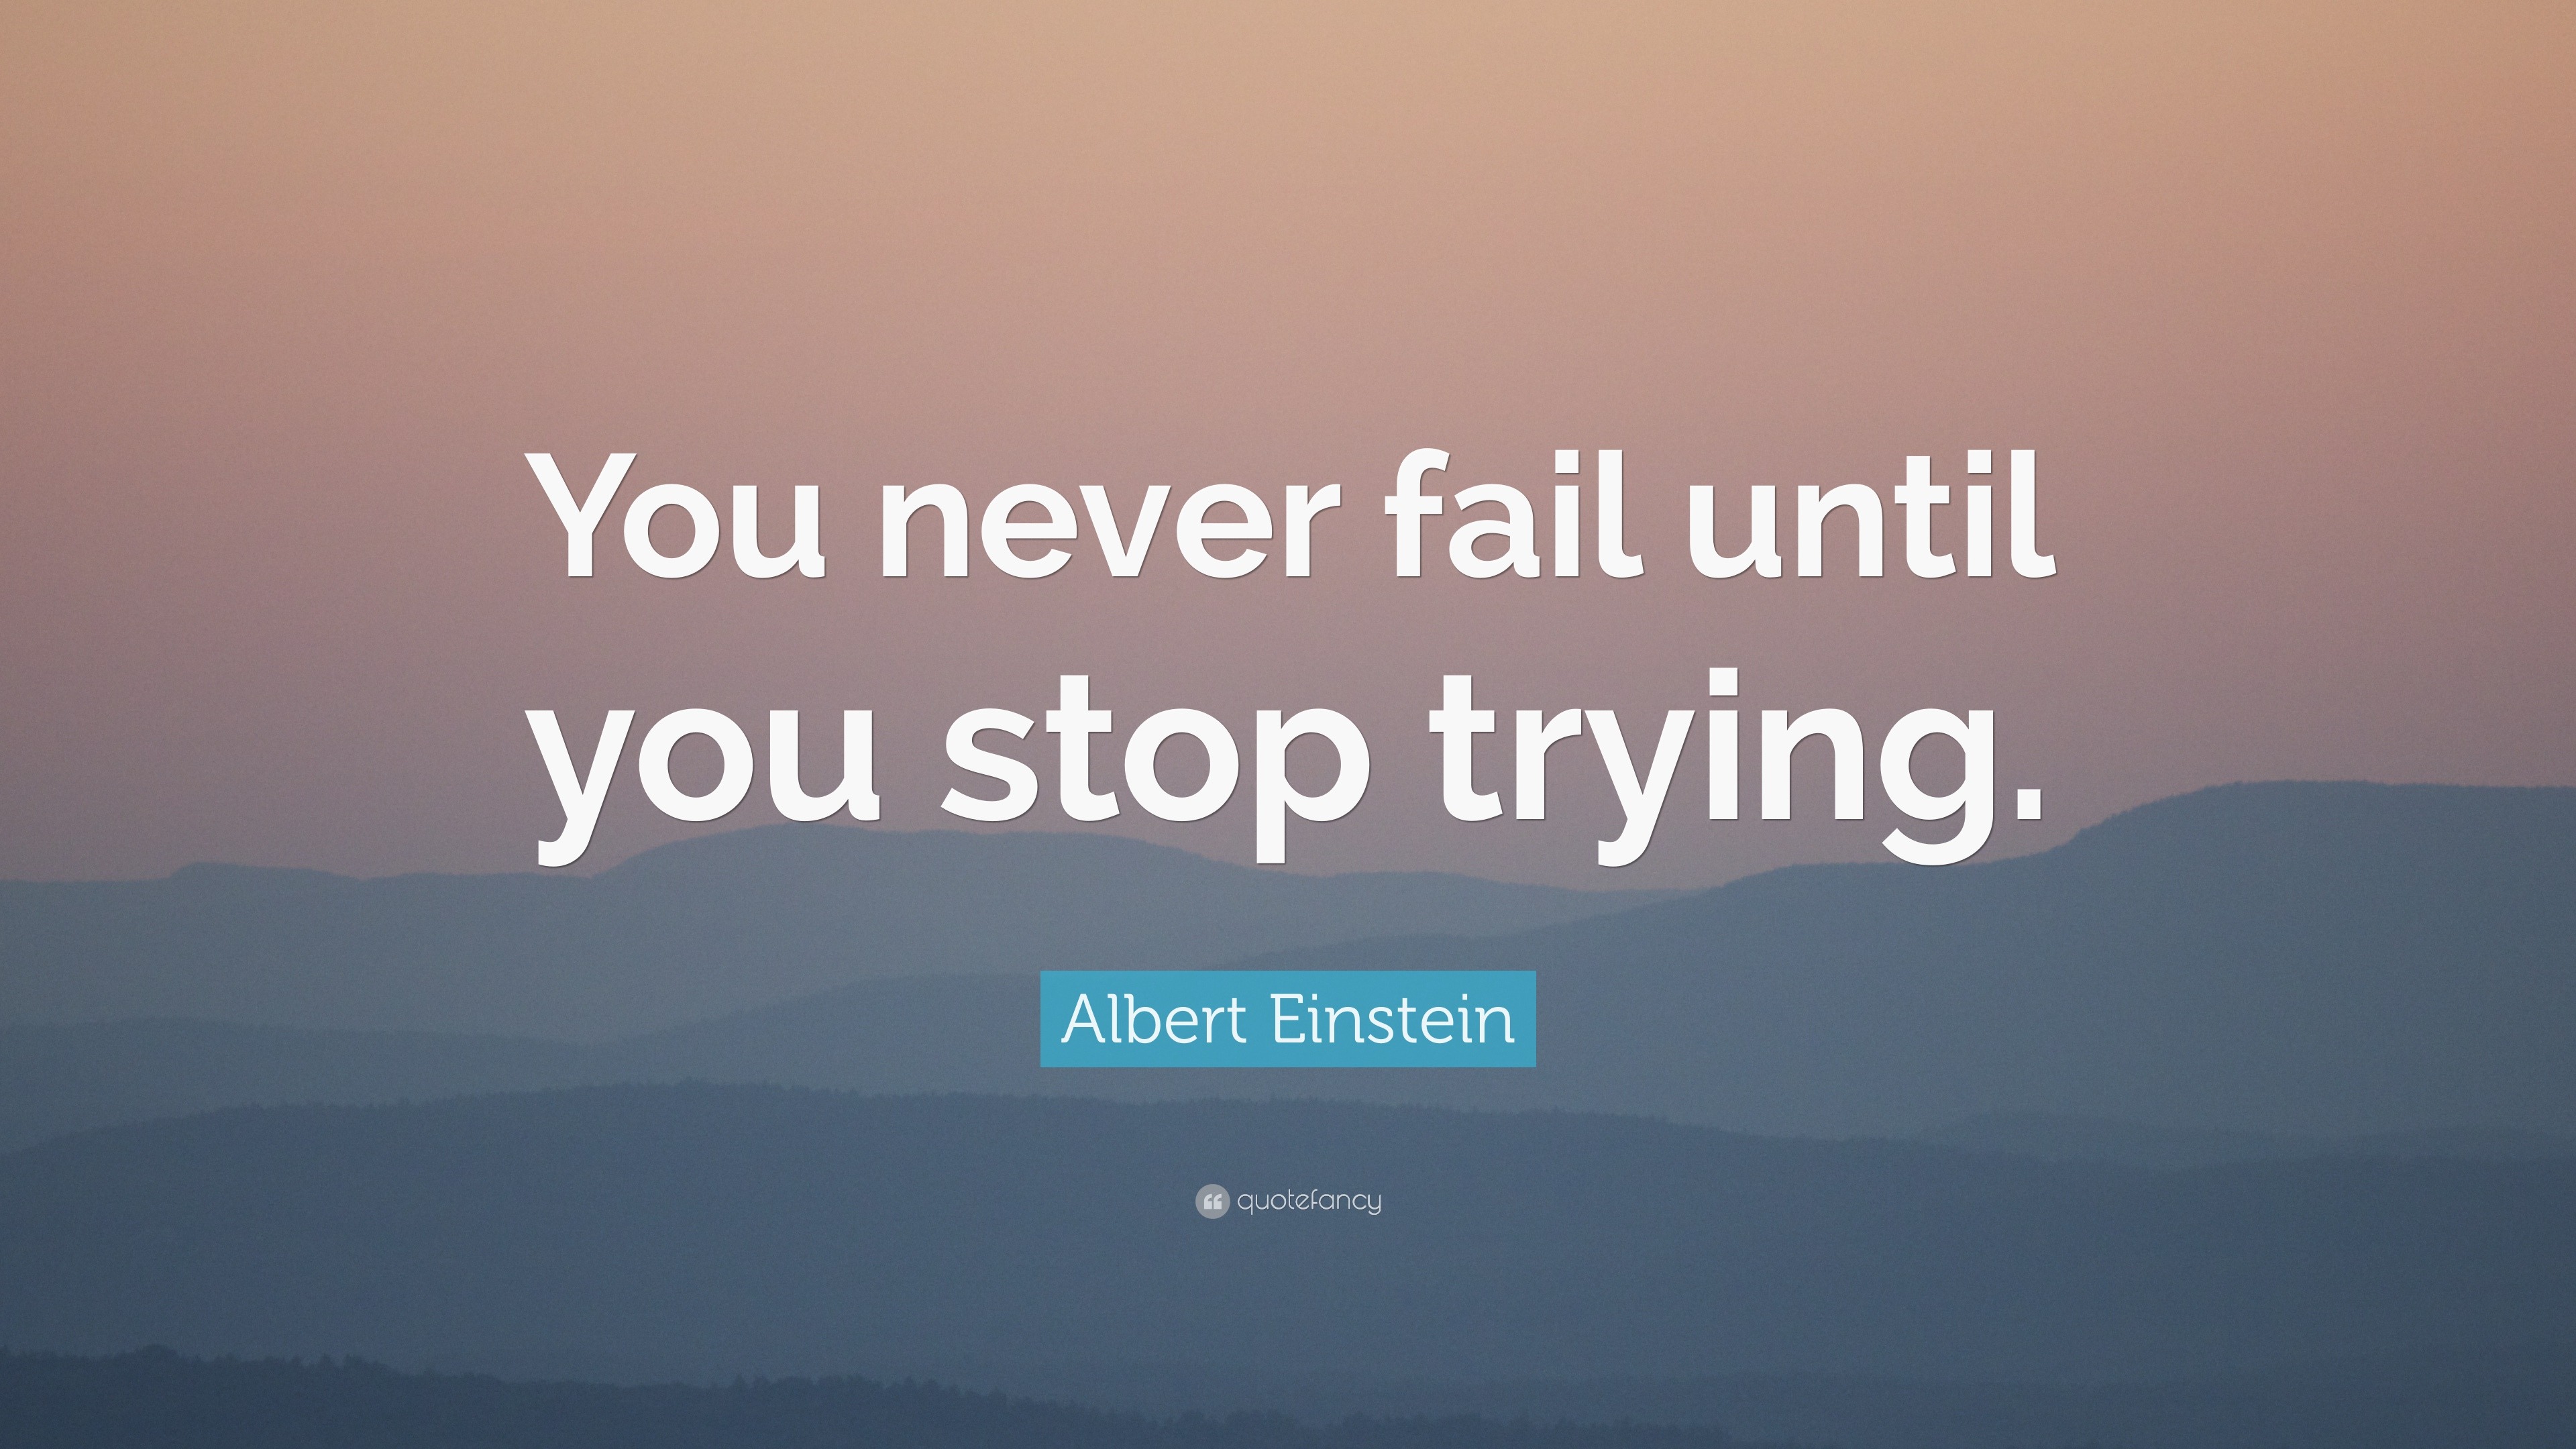 Albert Einstein Quote: “You never fail until you stop trying.”